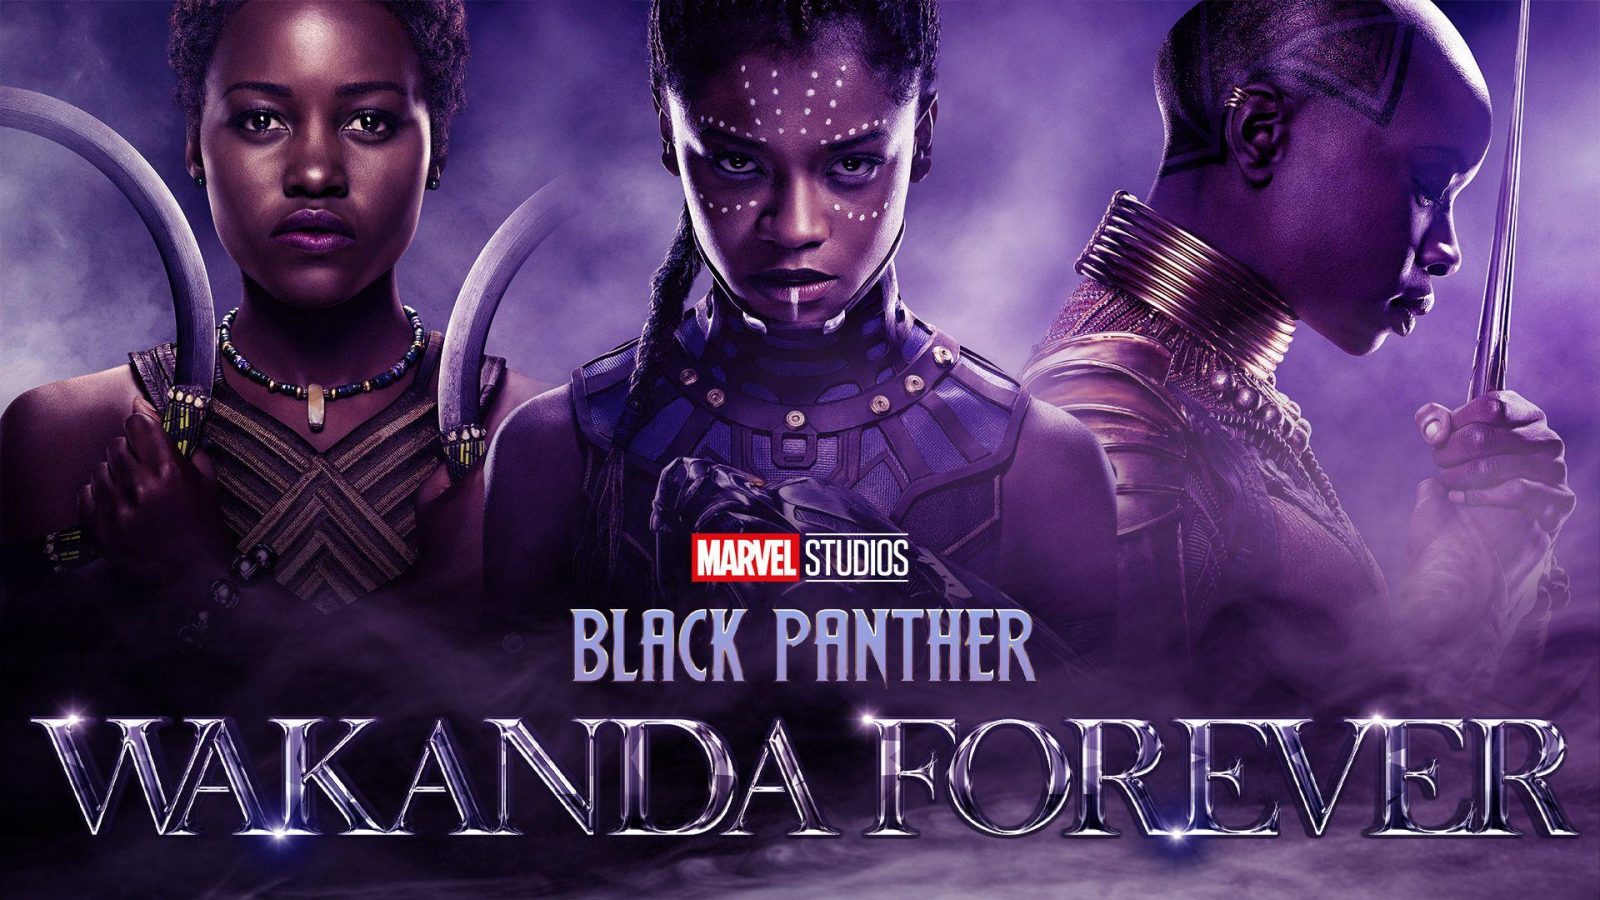 Here's how Black Panther Wakanda Forever honored Chadwick Boseman's legacy on set